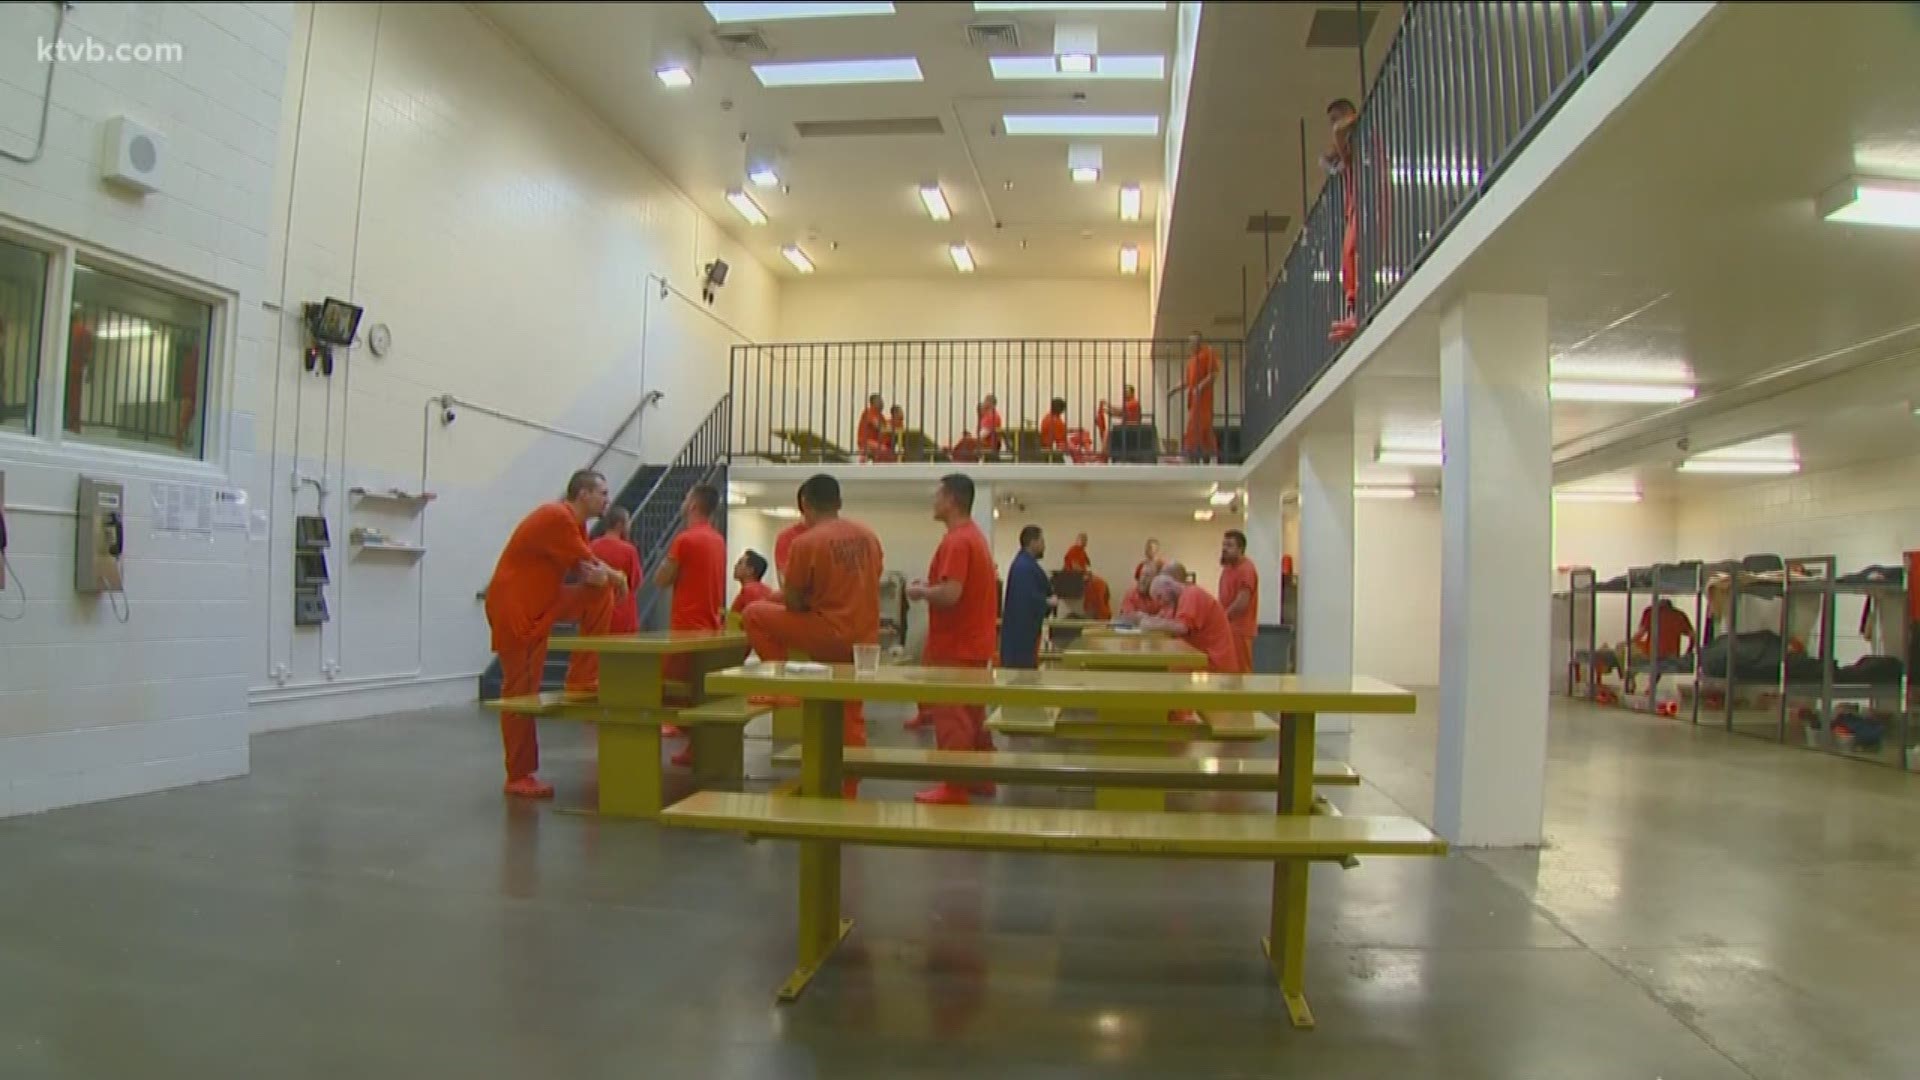 Canyon County officials have been hosting a series of town hall meetings about the jail bond to try and educate voters, who have voted down three previous bonds over the last 10 years.